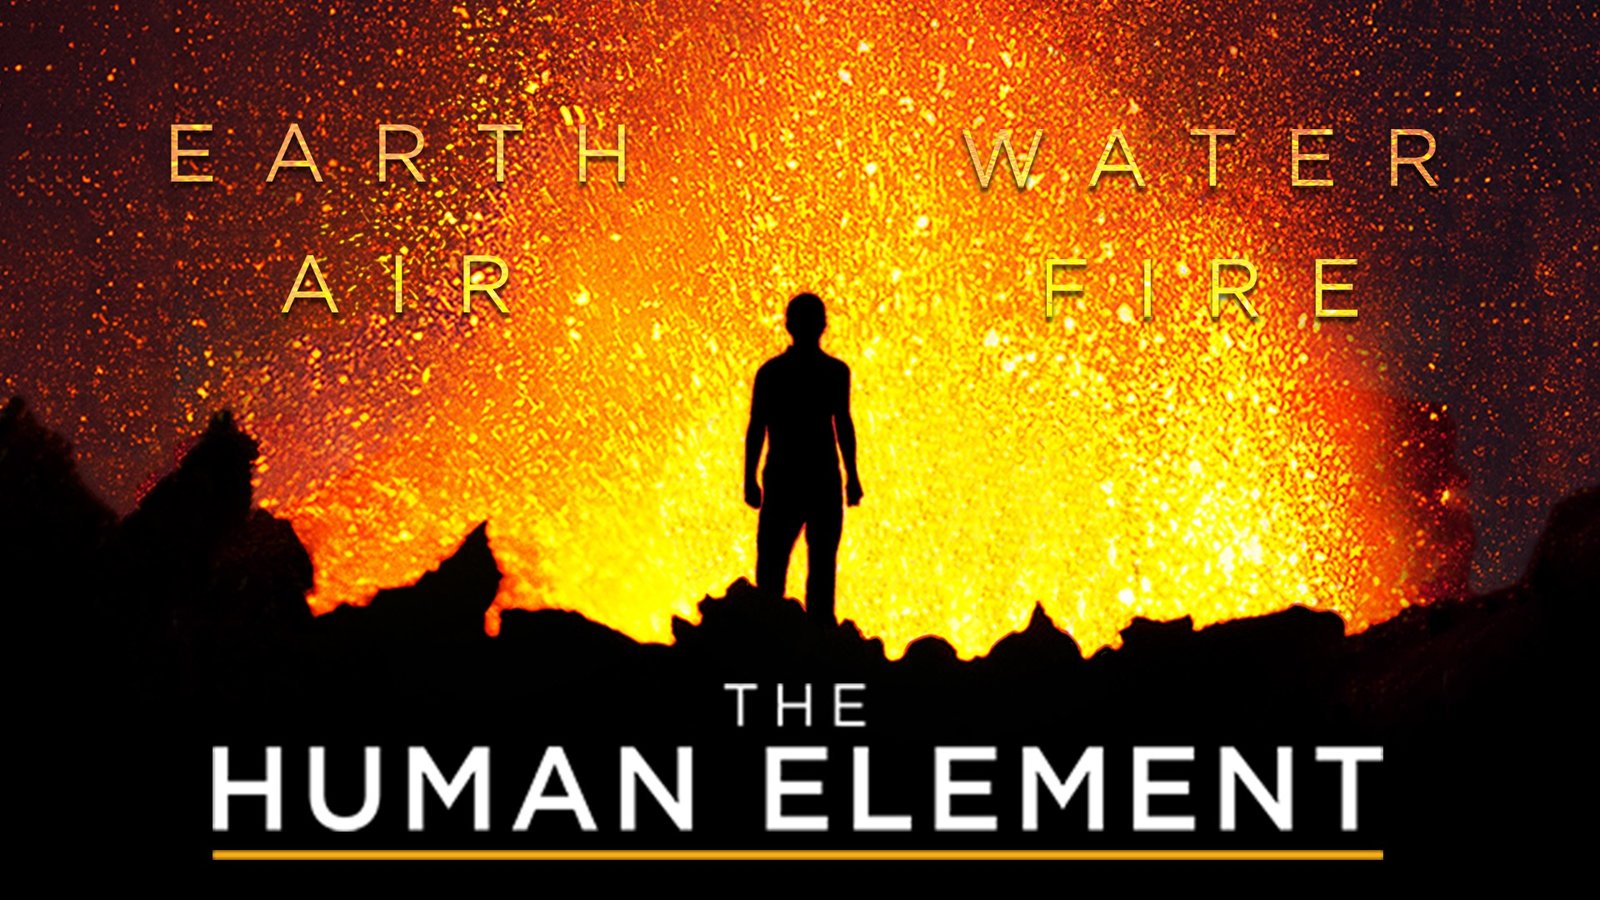 the human element book review